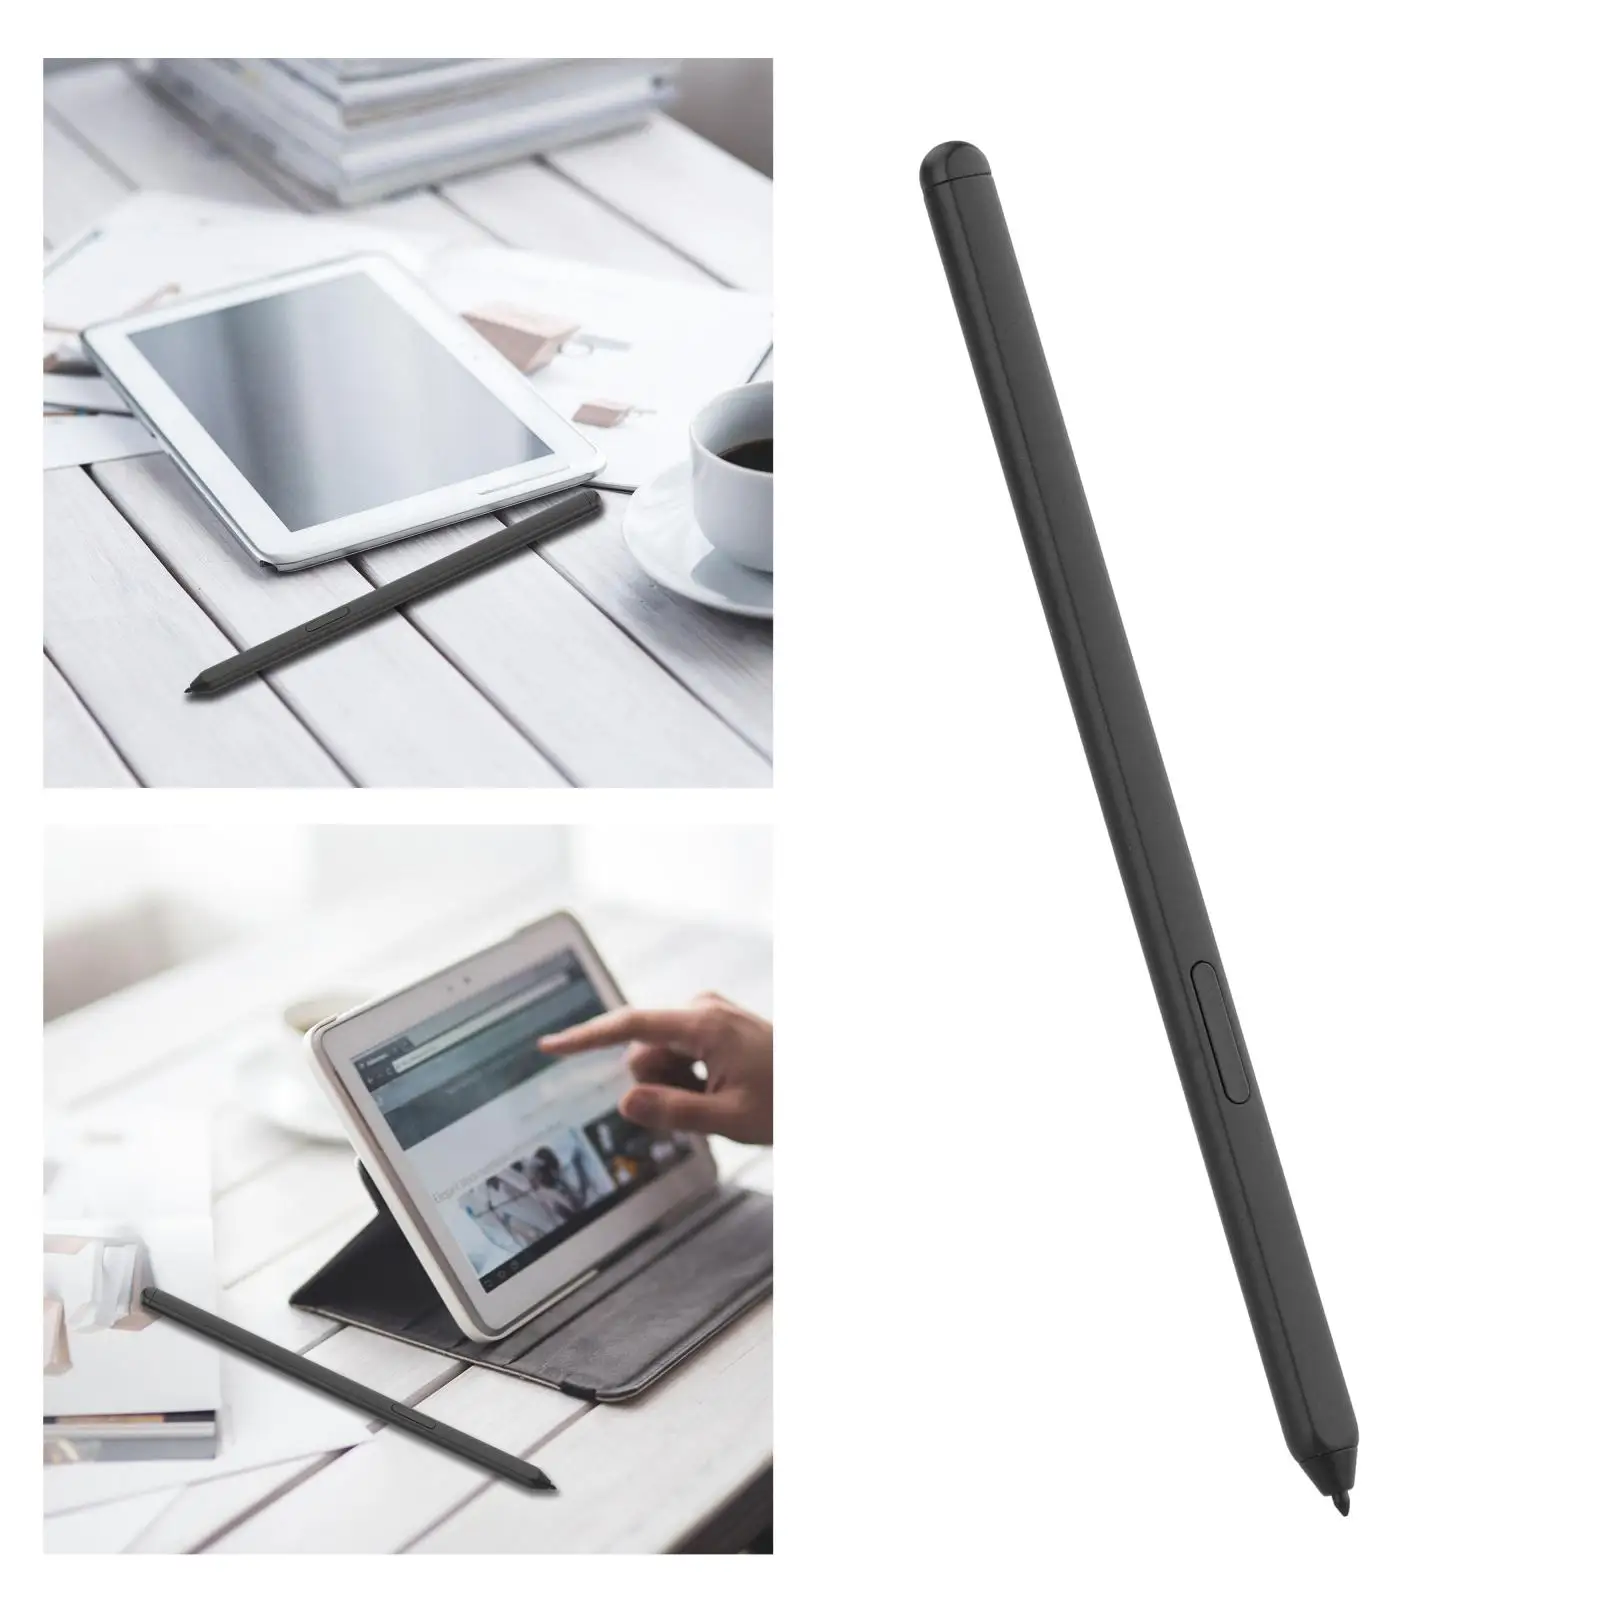 Stylus S-pen, Suitable for S21/S21 5G Electromagnetic Pen, Mobile Phone Screen Stylus, Soft Head Natural Grip for Writing